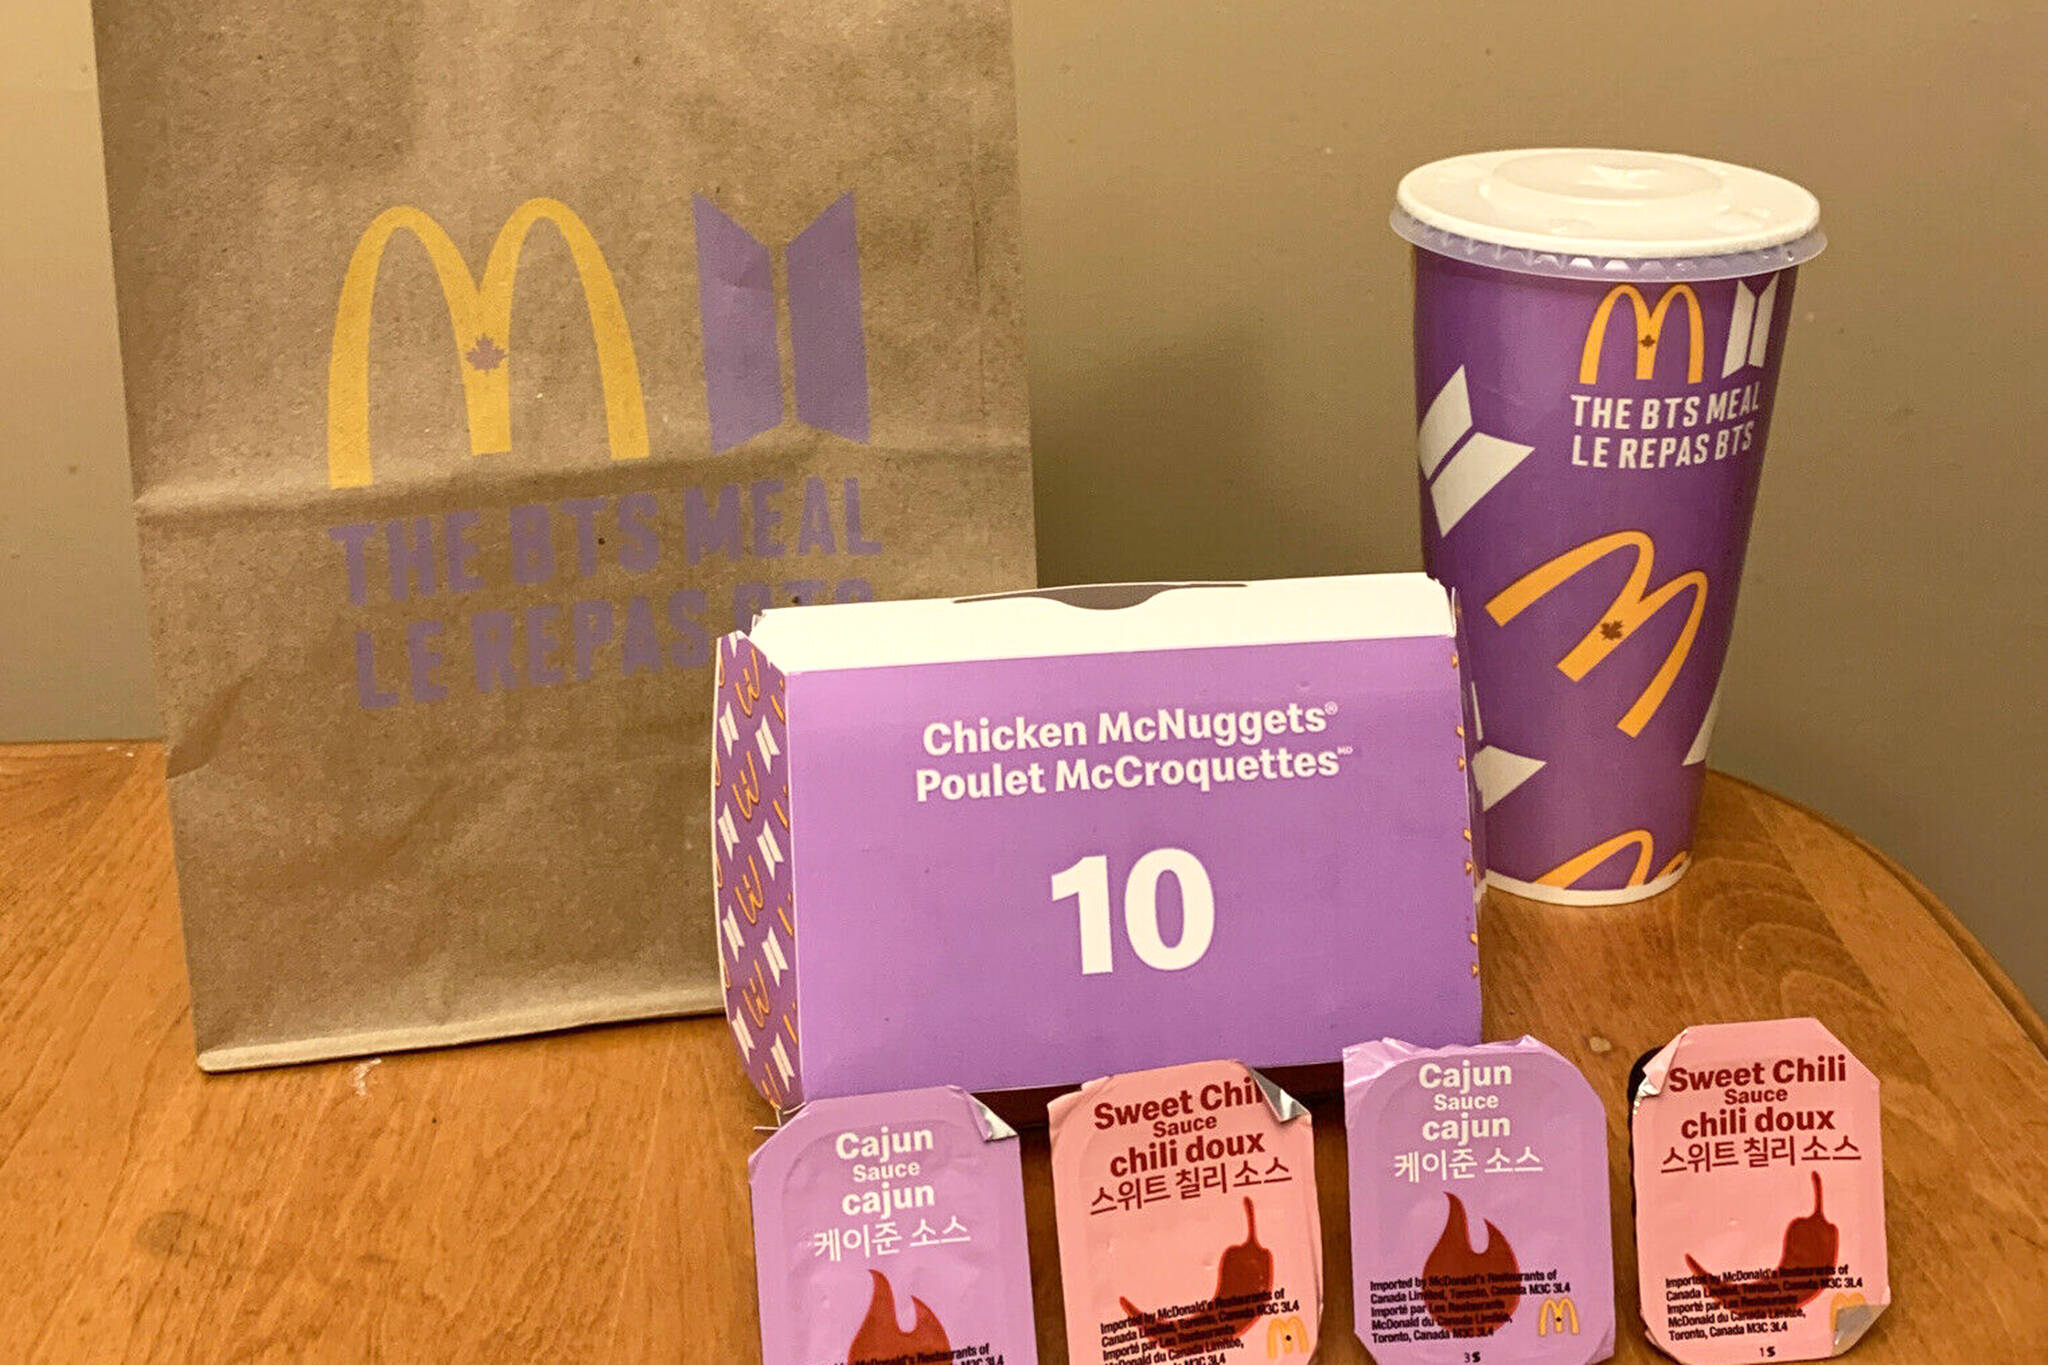 People Are Already Reselling Their Mcdonald S Bts Meal Wrappers Online